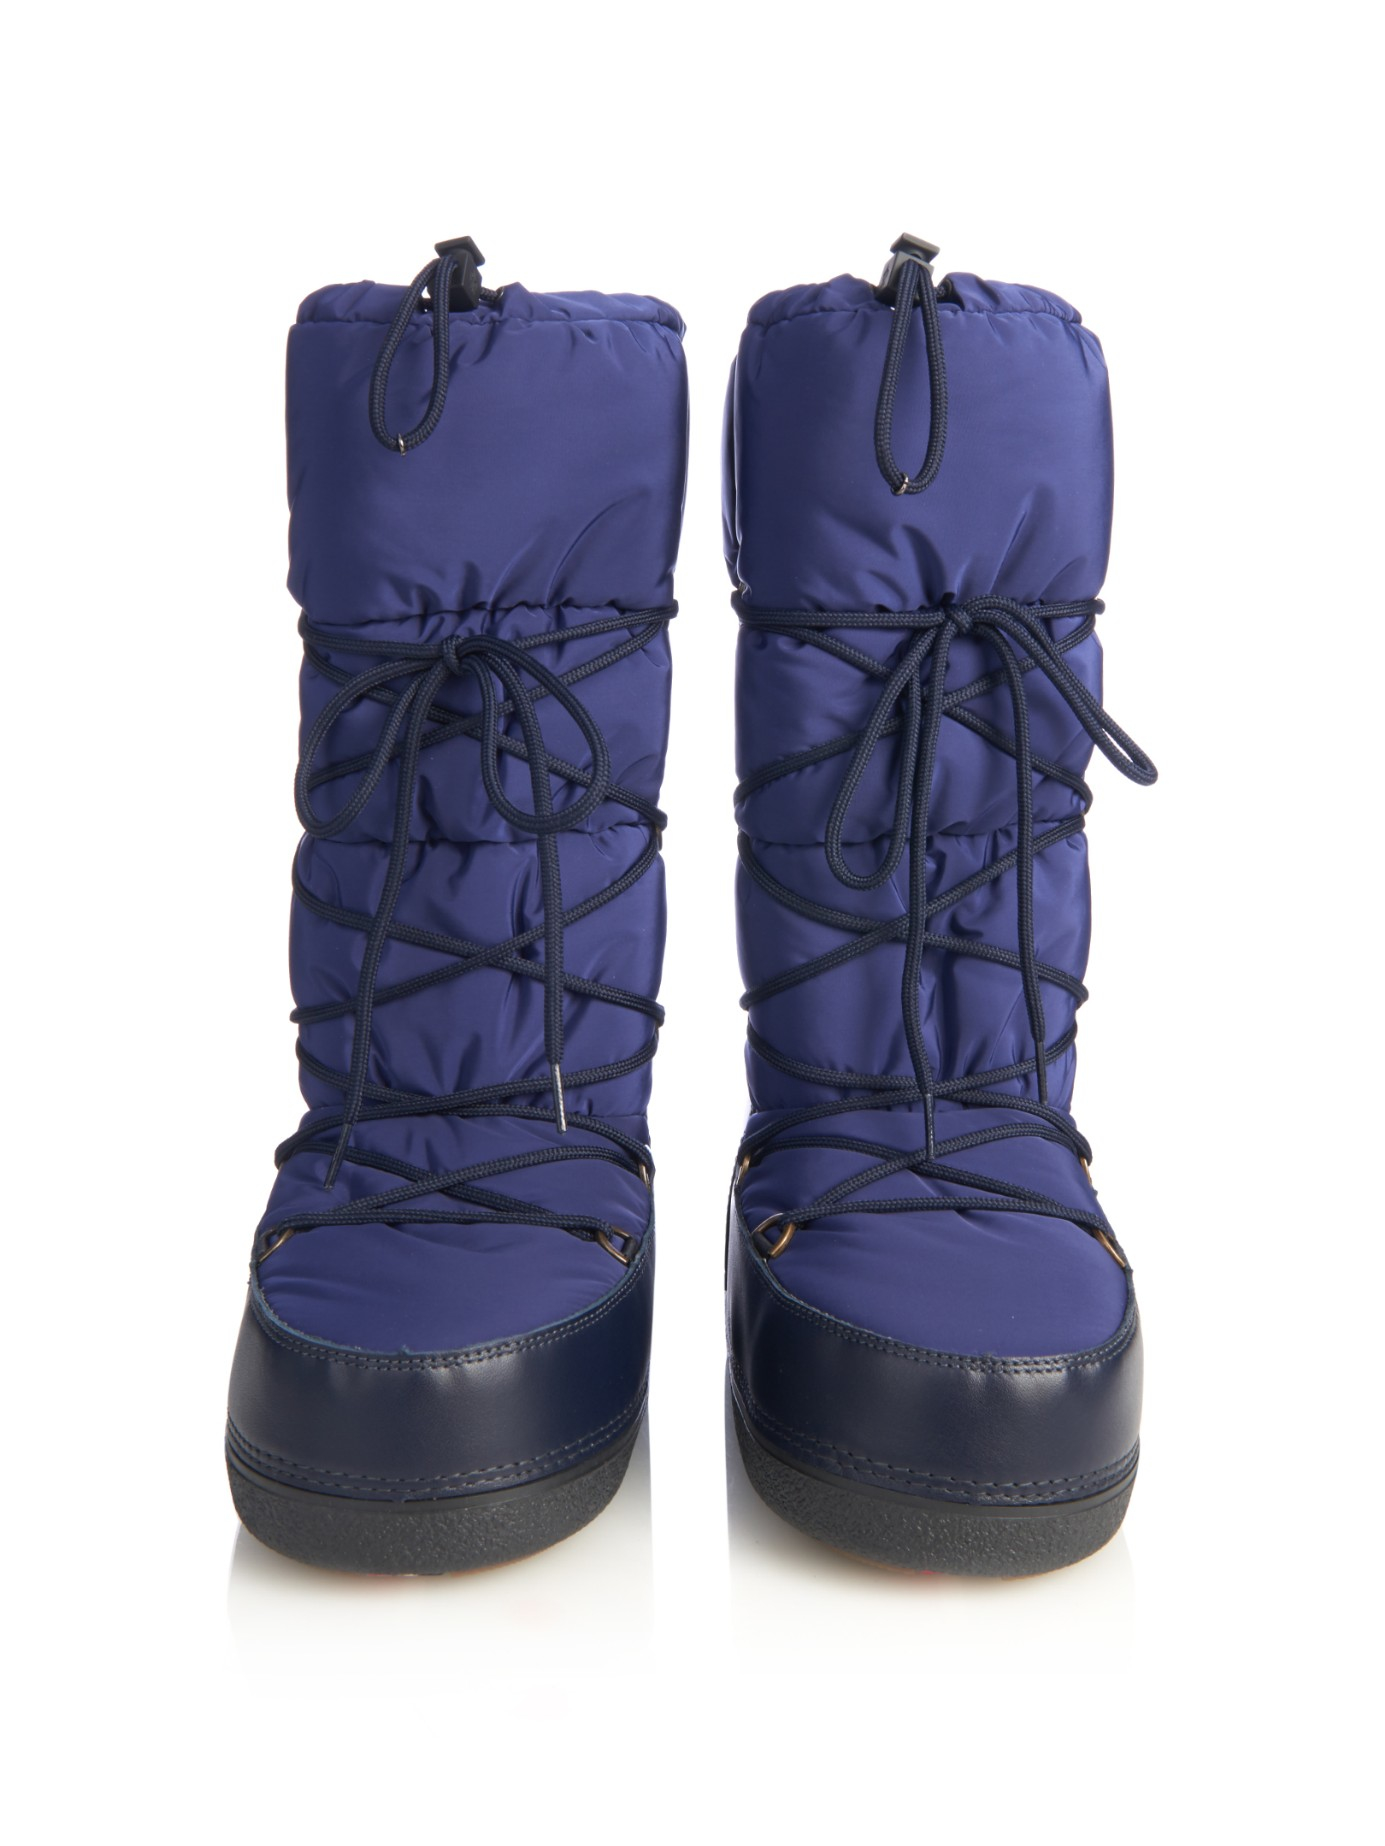 Moncler Synthetic Moon Quilted Ski Boots in Navy (Blue) - Lyst